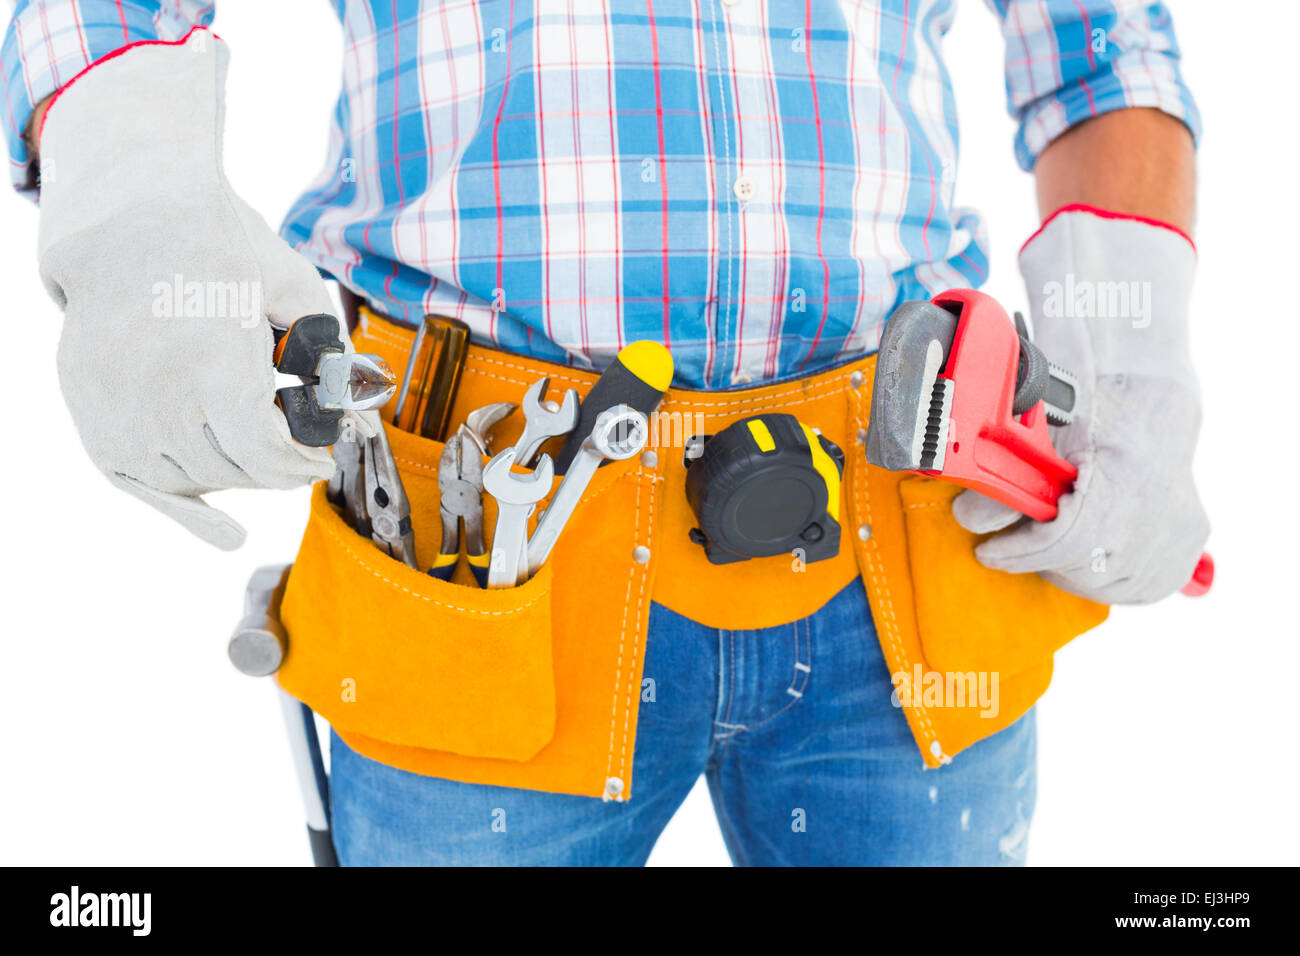 Midsection of handyman holding hand tools Stock Photo